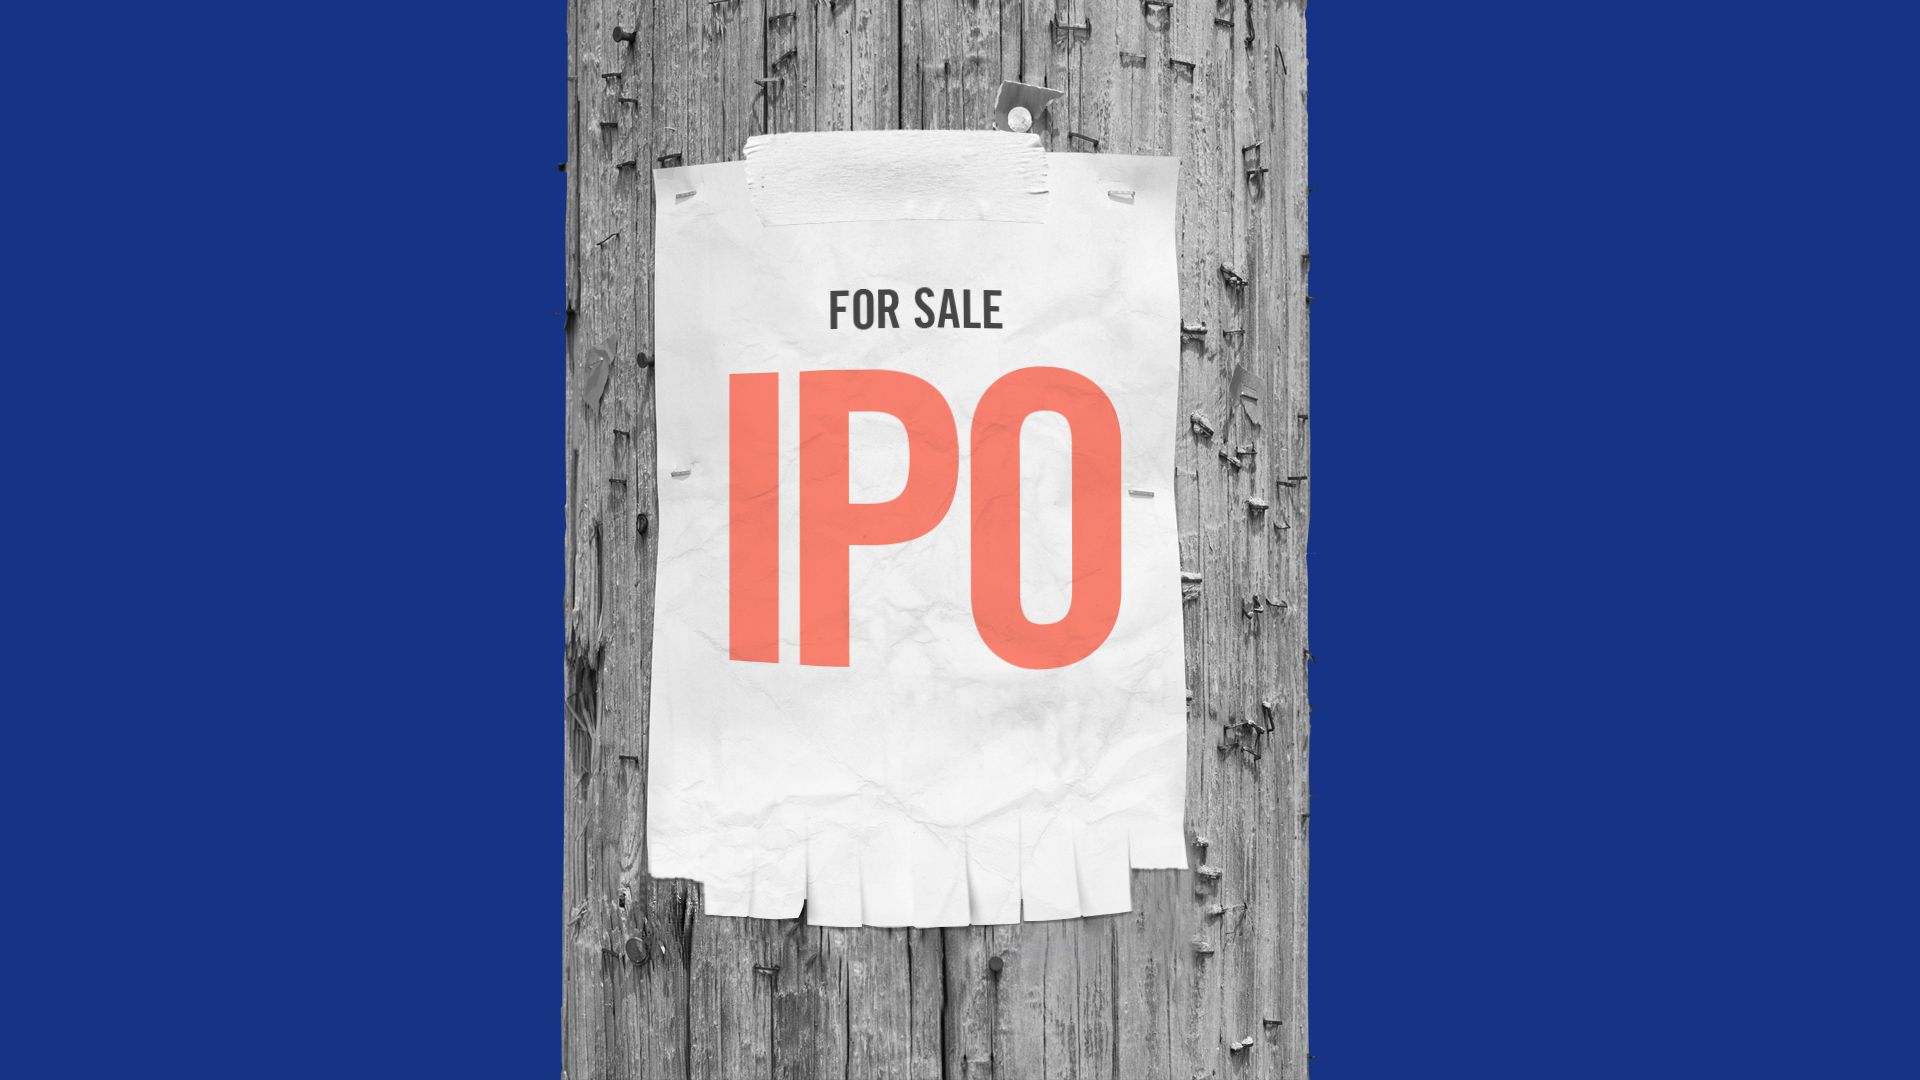 Illustration of advertisement on a telephone pole with ripped off tabs. The ad has “For Sale IPO"